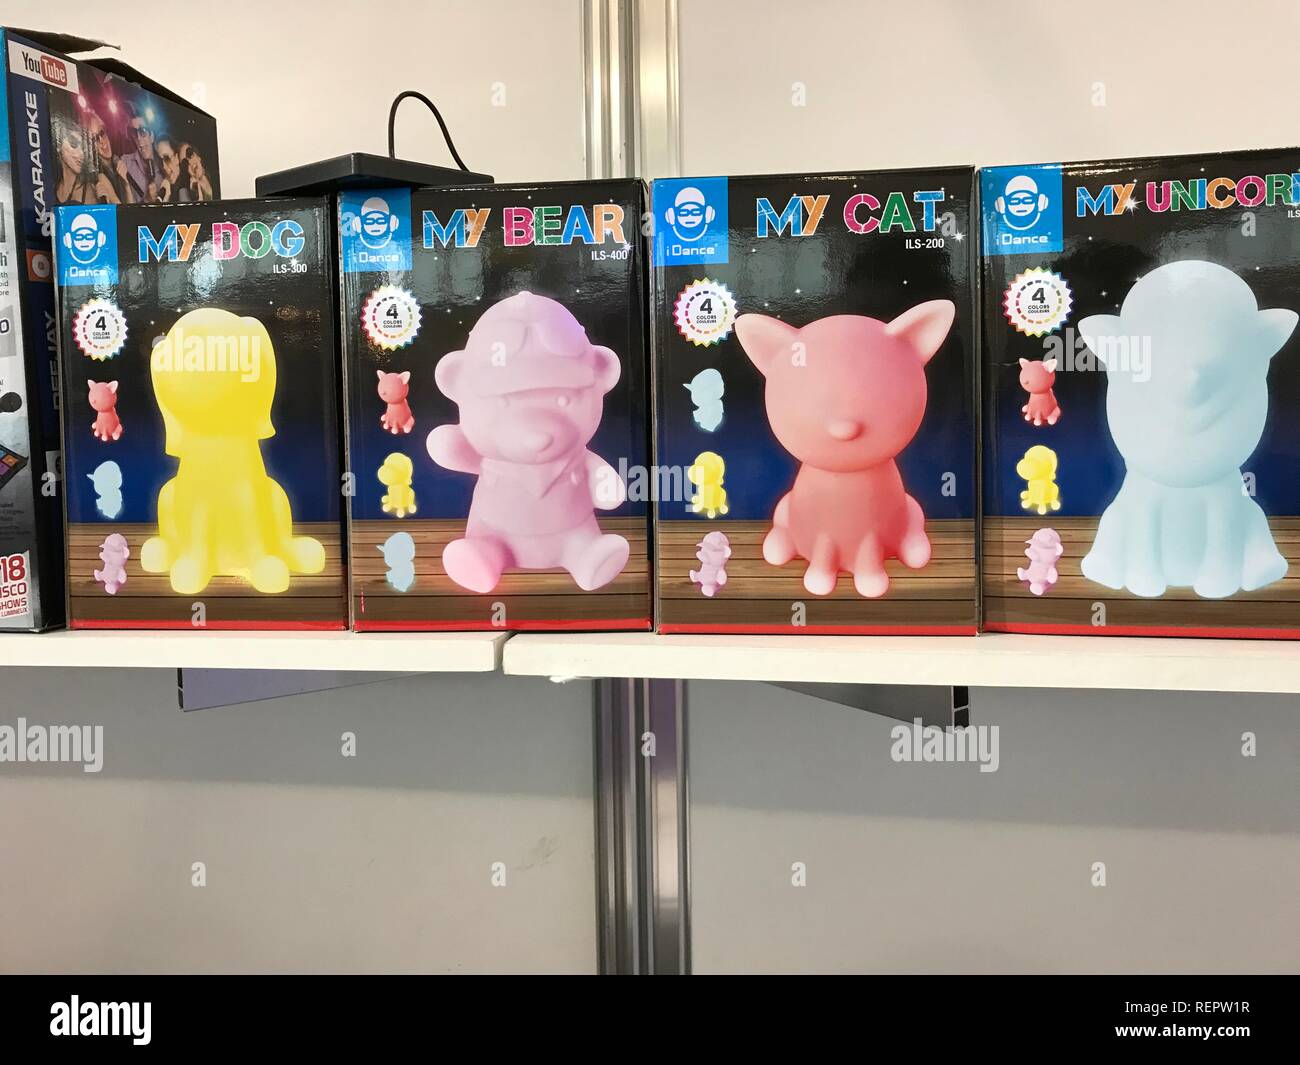 The Dutch firm iDance's new line of light up musical products, called MyUnicorn, also available in the shape of a dog, a bear and a cat, on show at Toy Fair in London. Stock Photo